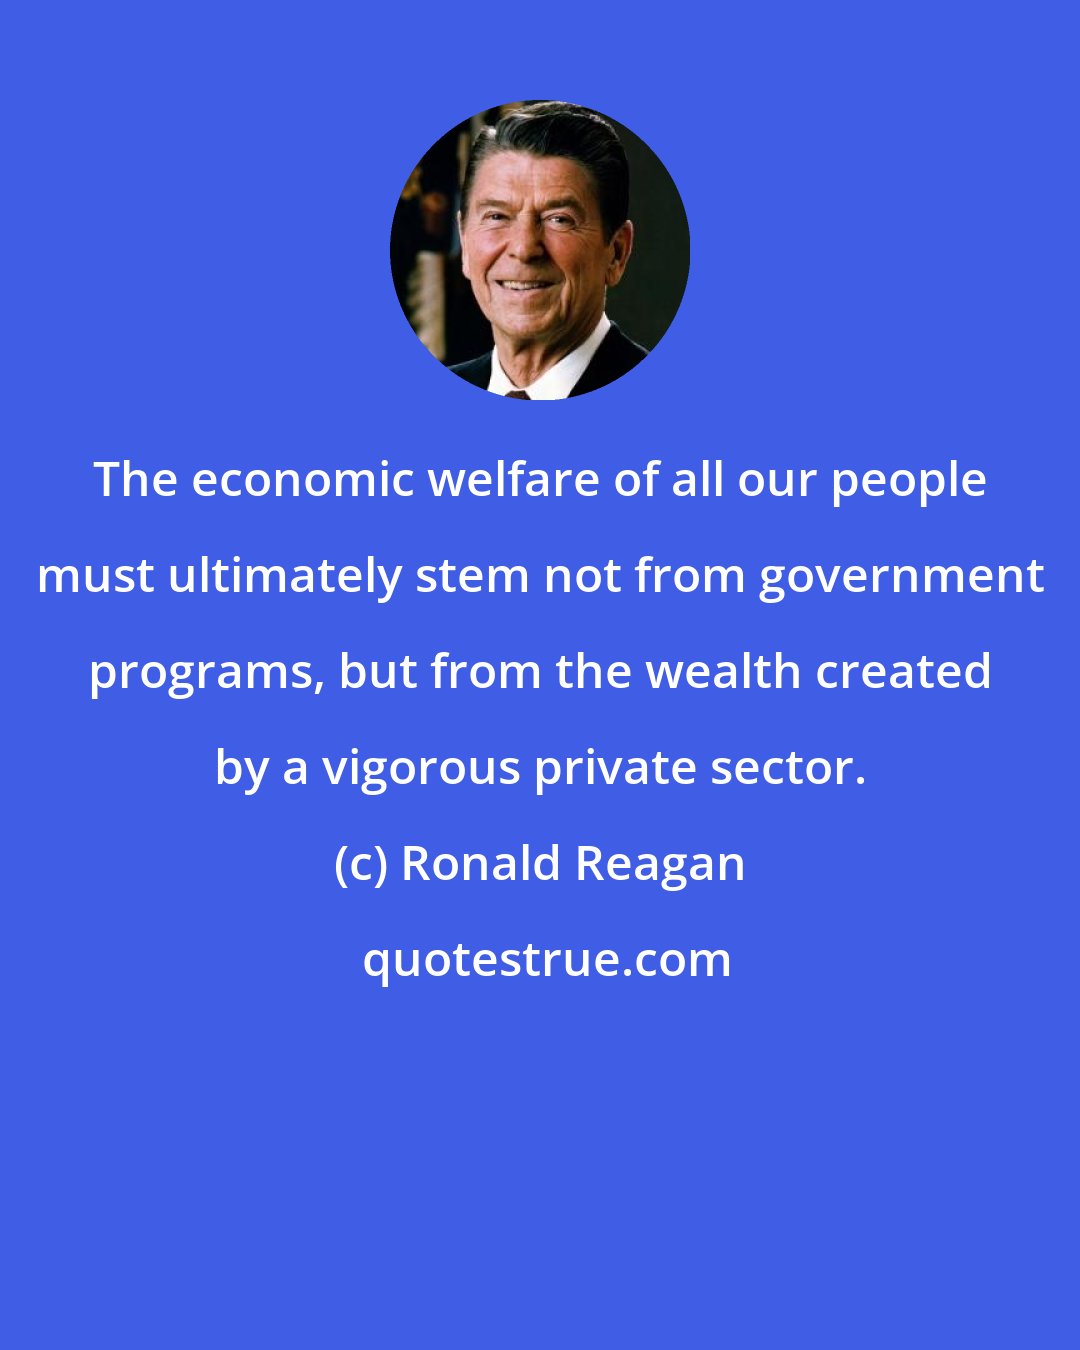 Ronald Reagan: The economic welfare of all our people must ultimately stem not from government programs, but from the wealth created by a vigorous private sector.